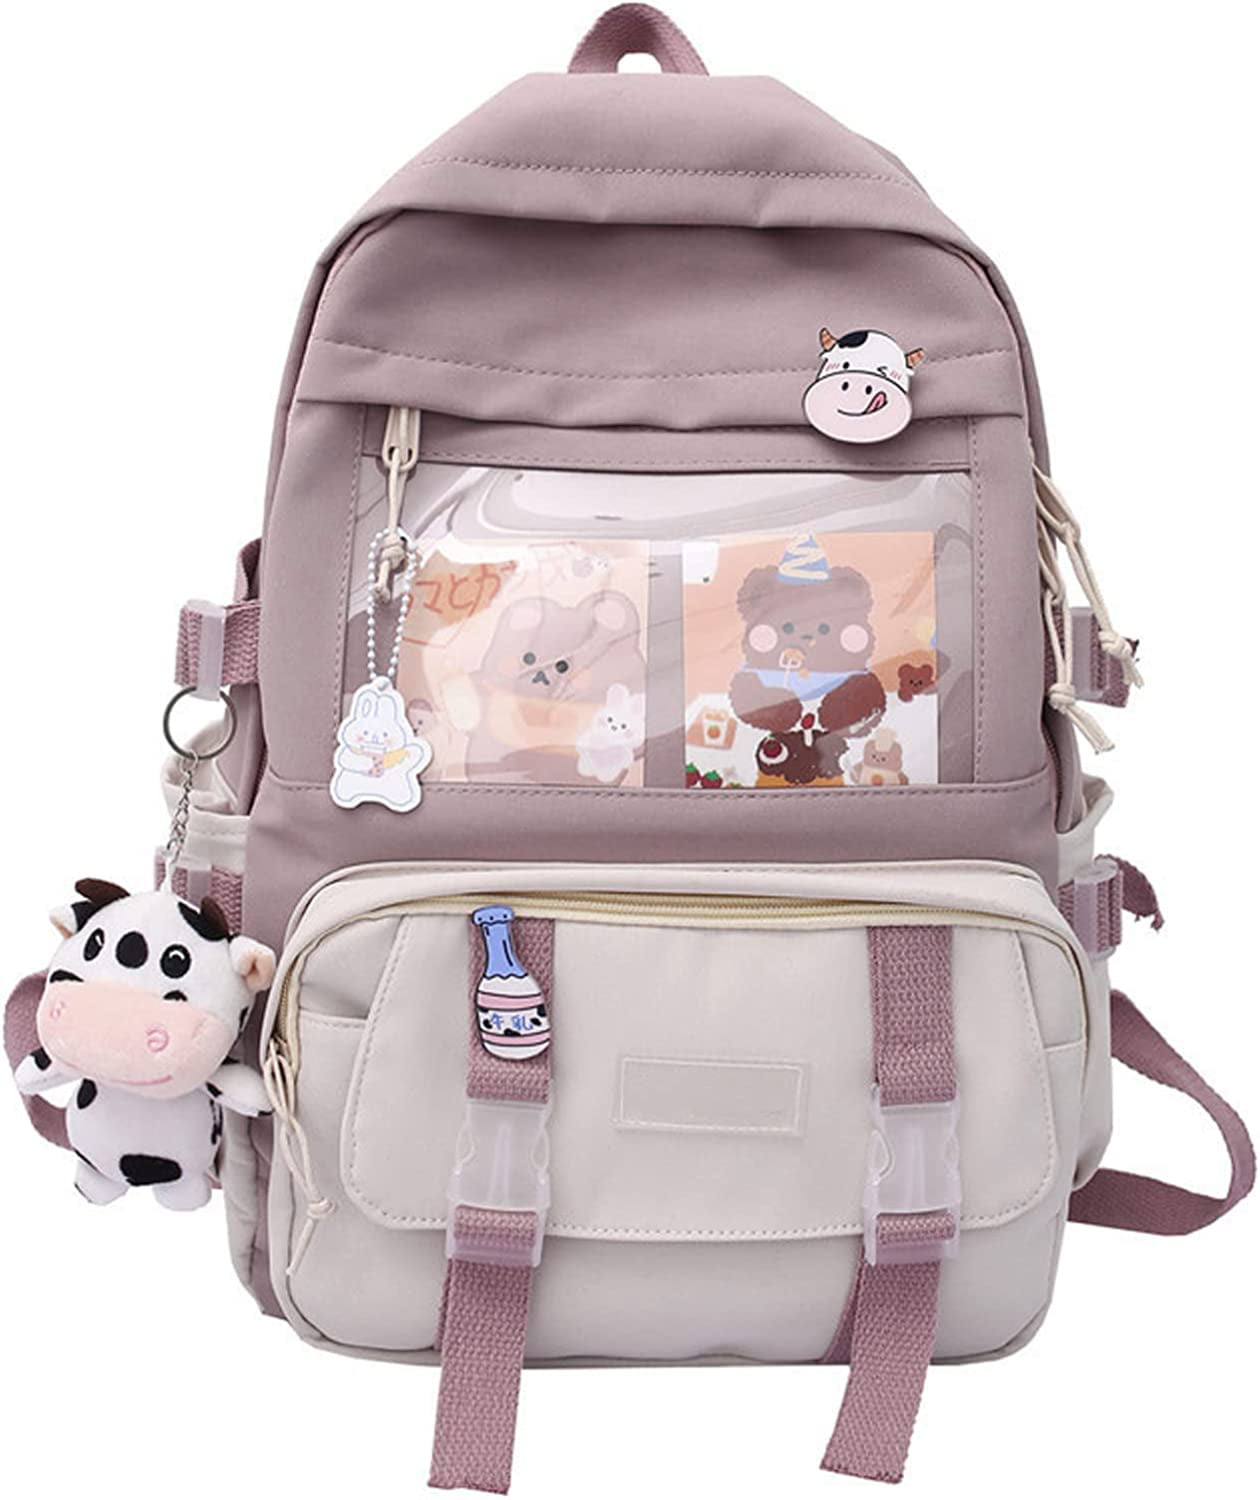 CoCopeaunts Kawaii Backpack with Cute Pin Accessories Plush Pendant ...